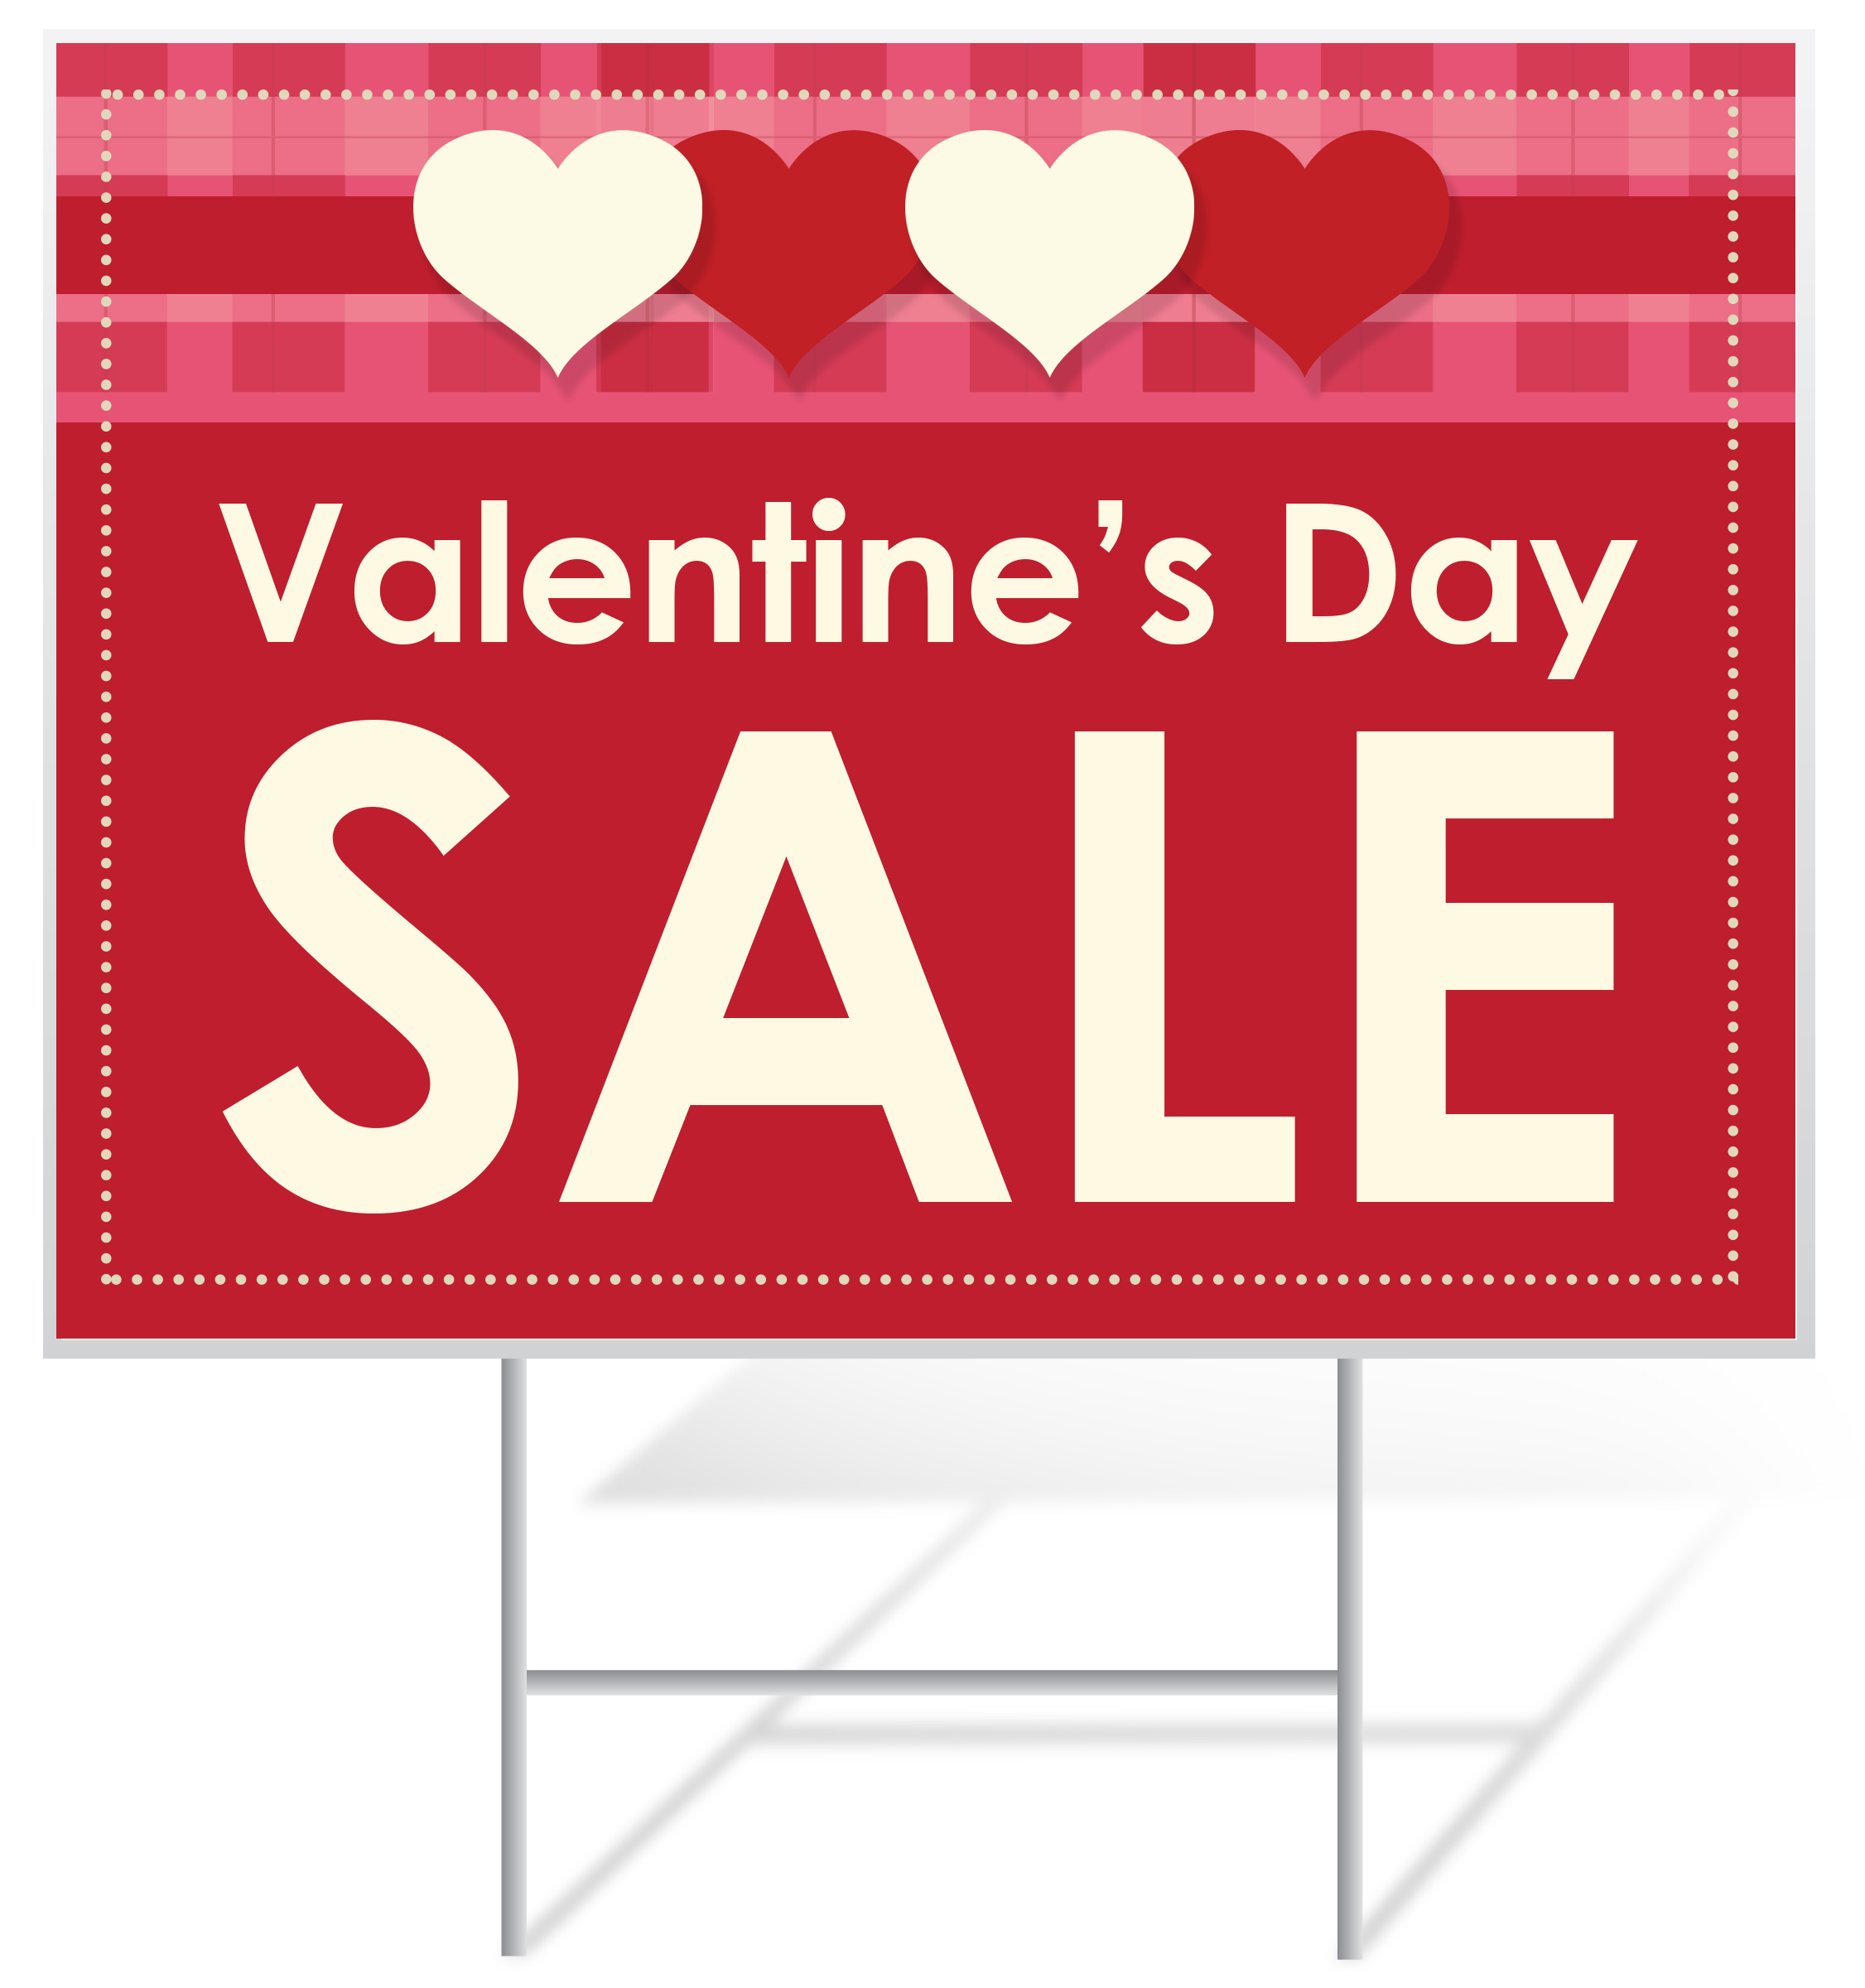 Valentine's Day Lawn Sign Example | LawnSigns.com